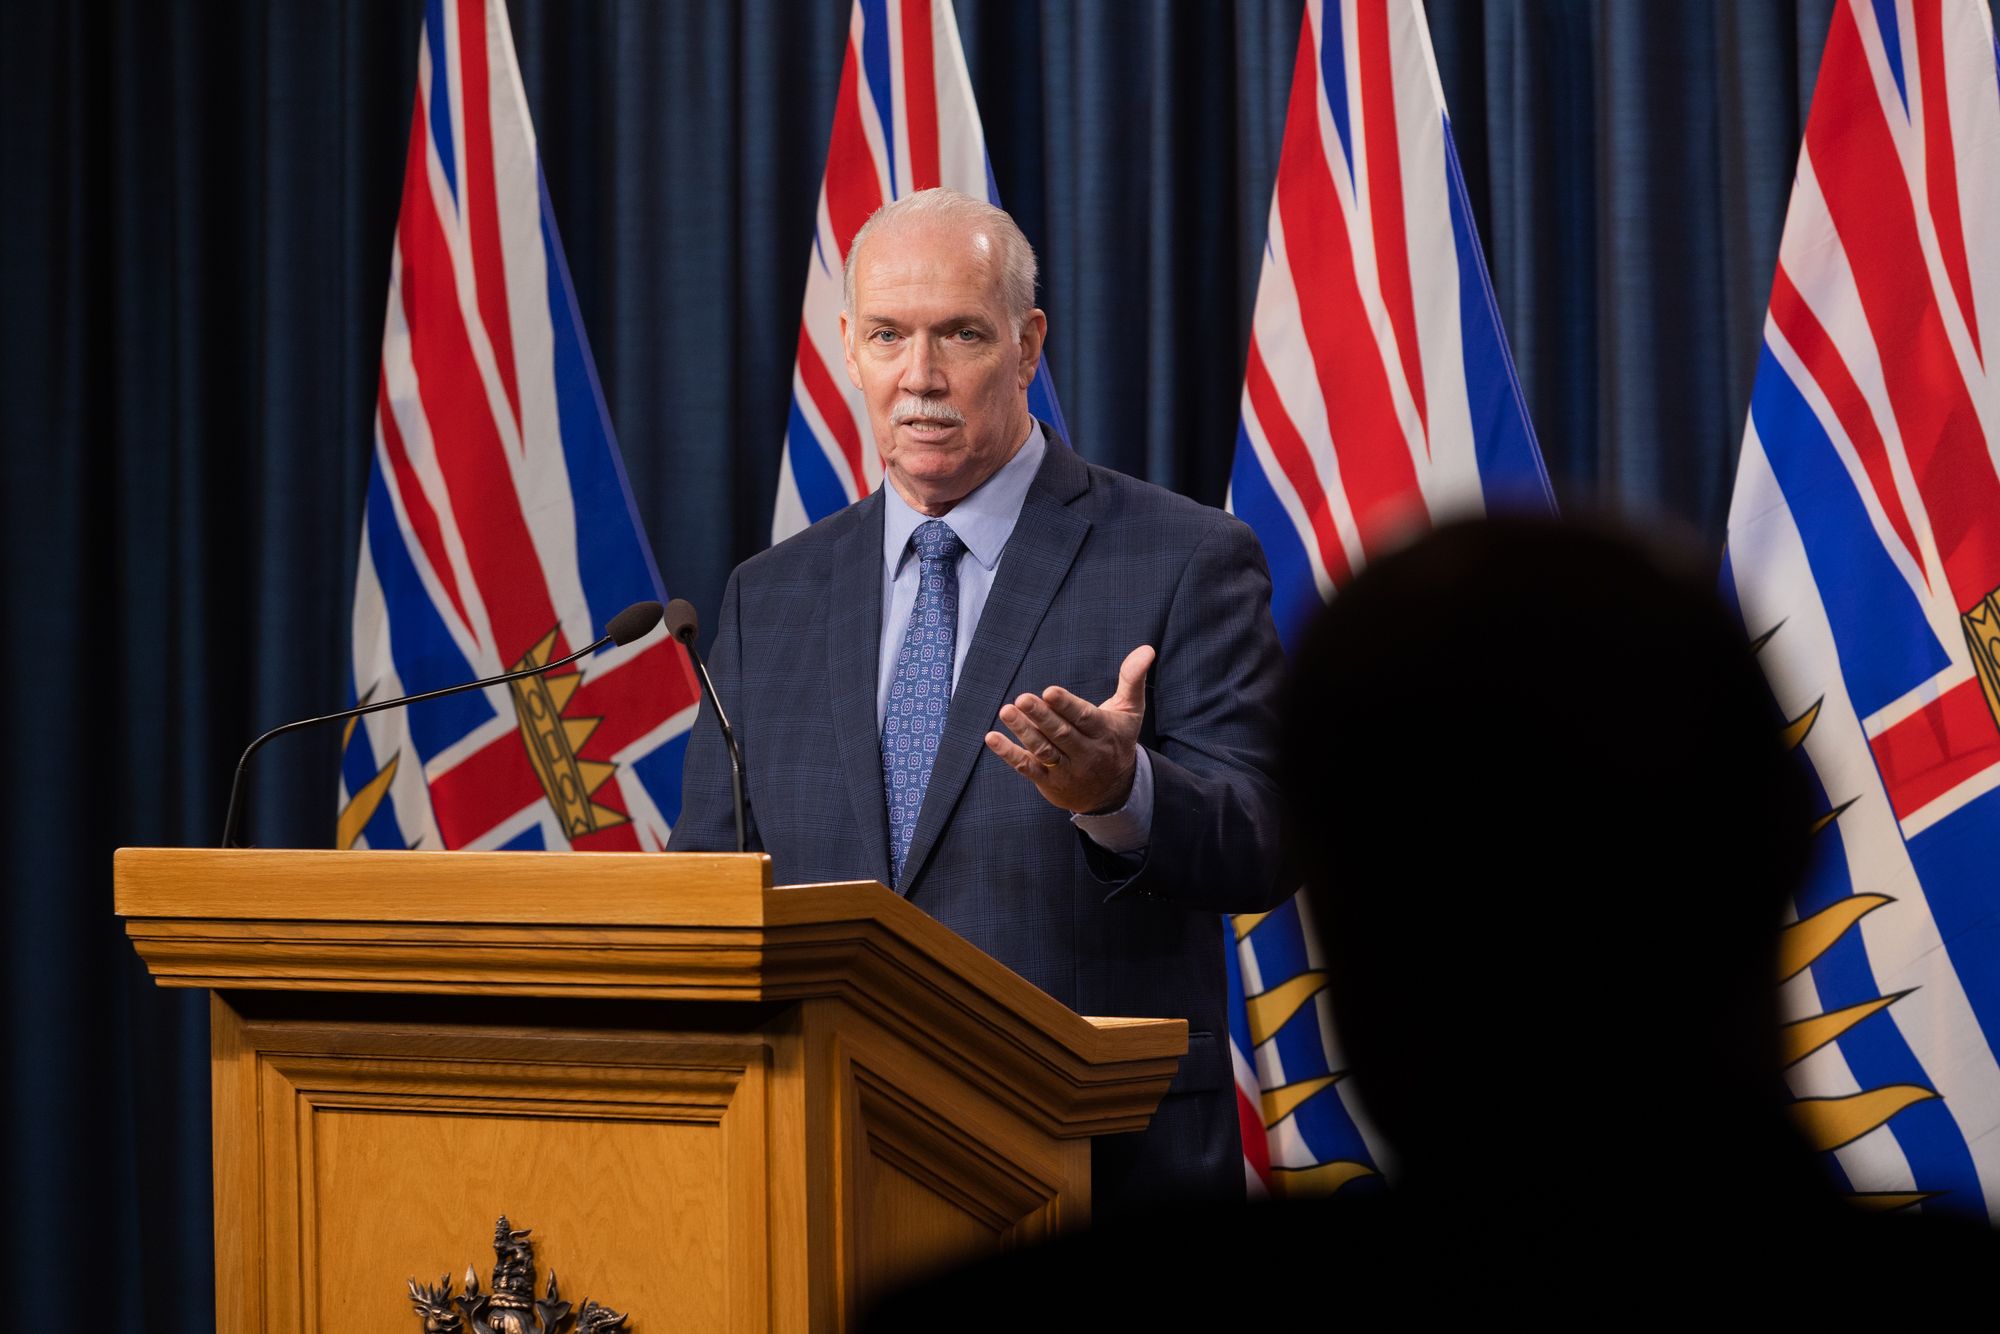 John Horgan Is Stepping Down as Premier. What’s Next for B.C.?